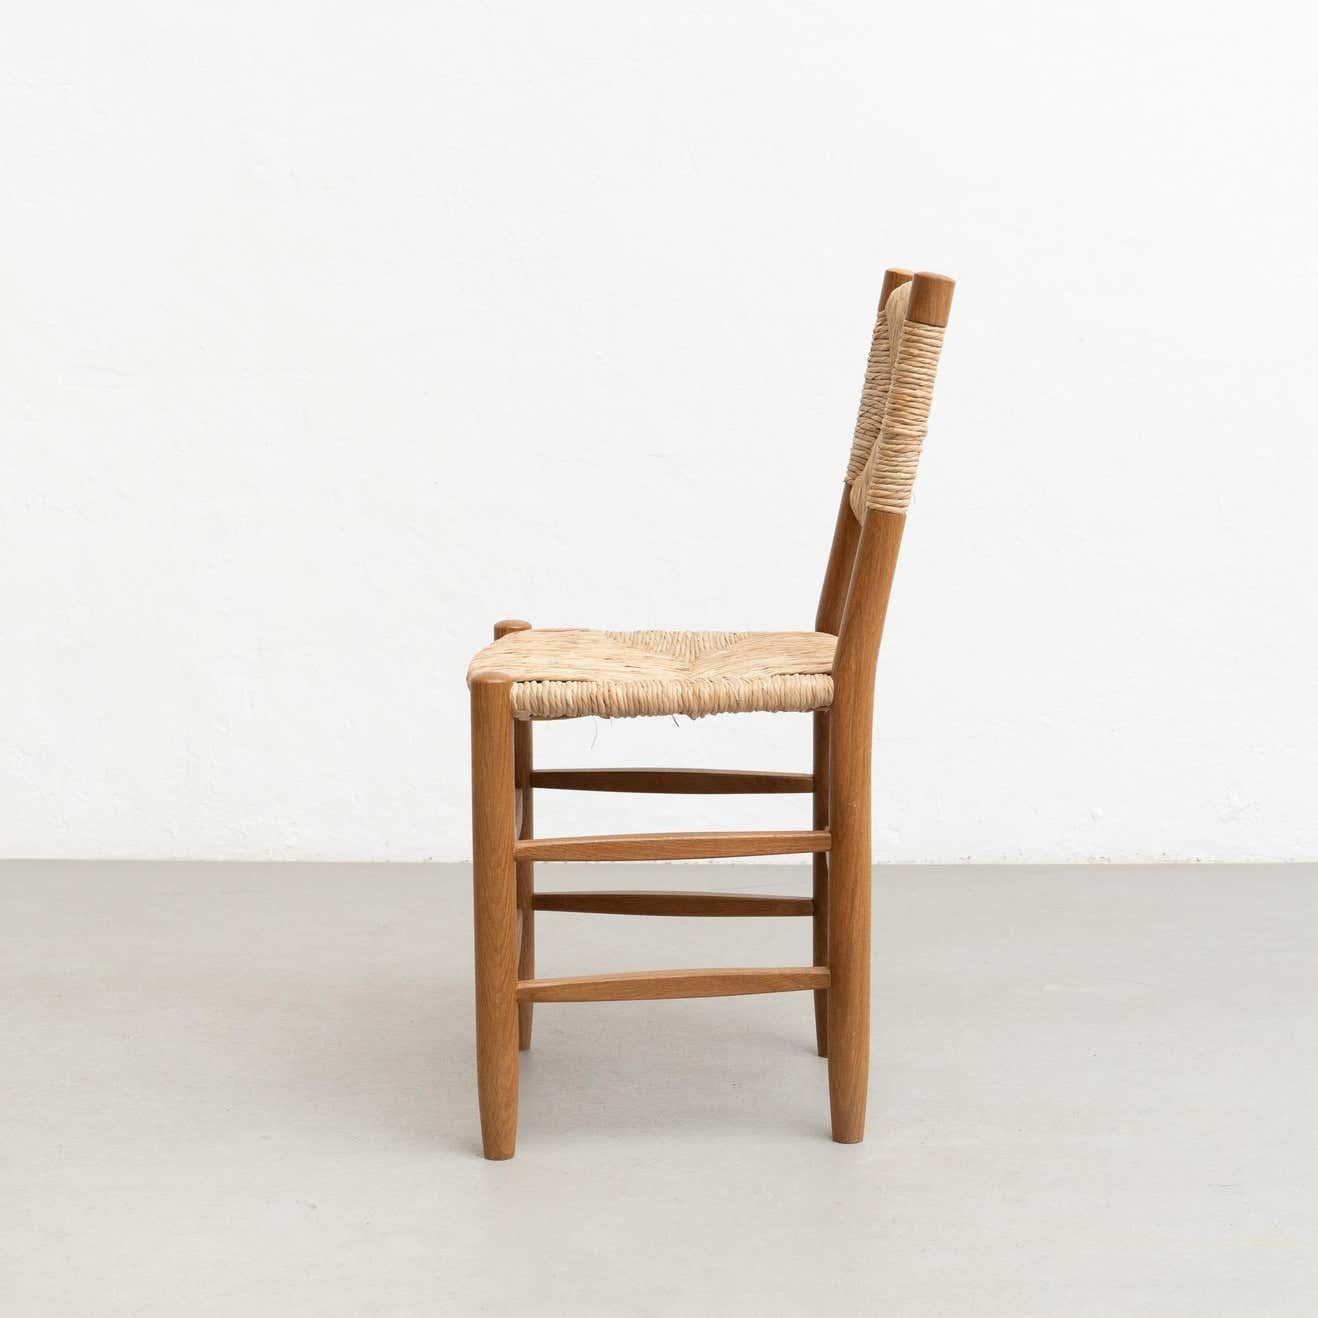 Set of Six After Charlotte Perriand N.19 Chairs, Wood Rattan, Mid-Century Modern For Sale 12